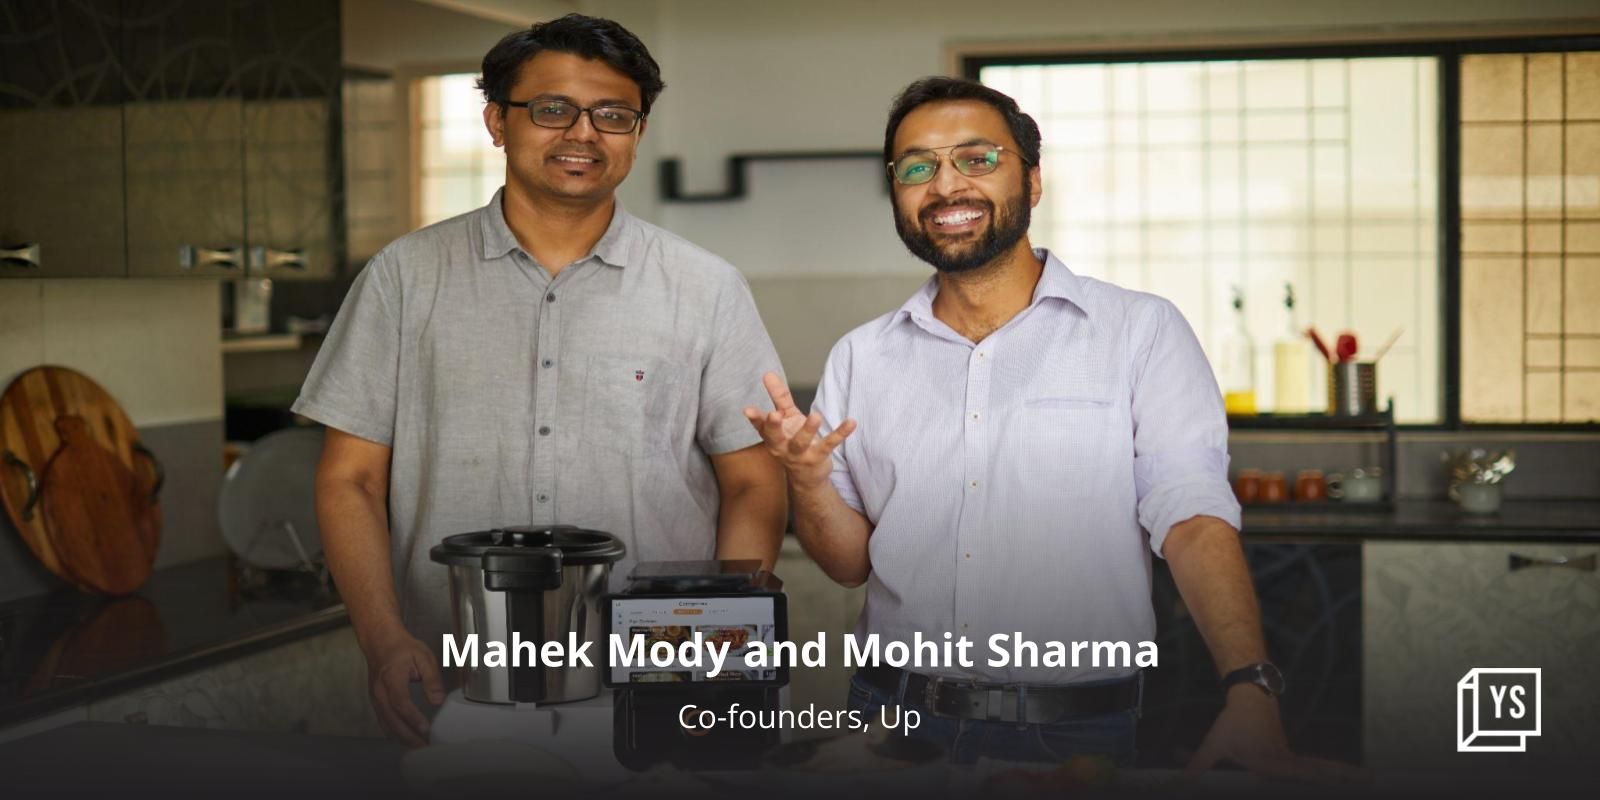 Backed by Zerodha's Nithin Kamath, this smart appliance is catering to  Indian cooking needs